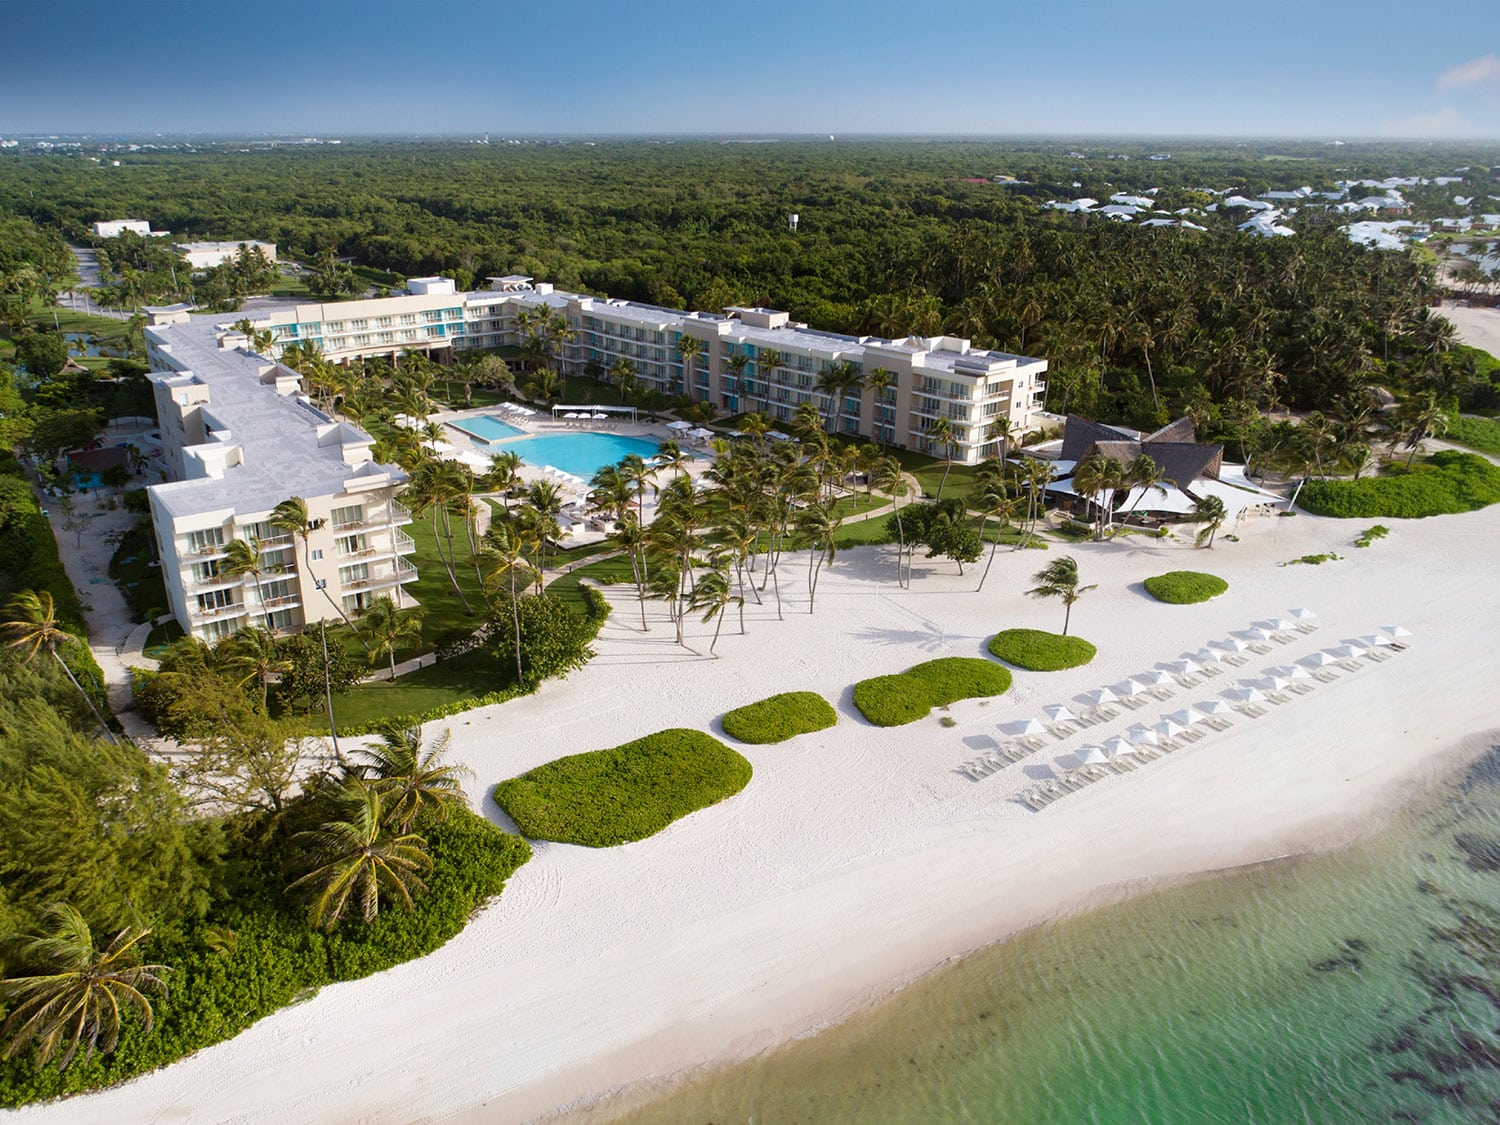 An aerial view of the Westin Puntacana Resort & Club in Punta Cana on the Caribbean island of the Dominican Republic